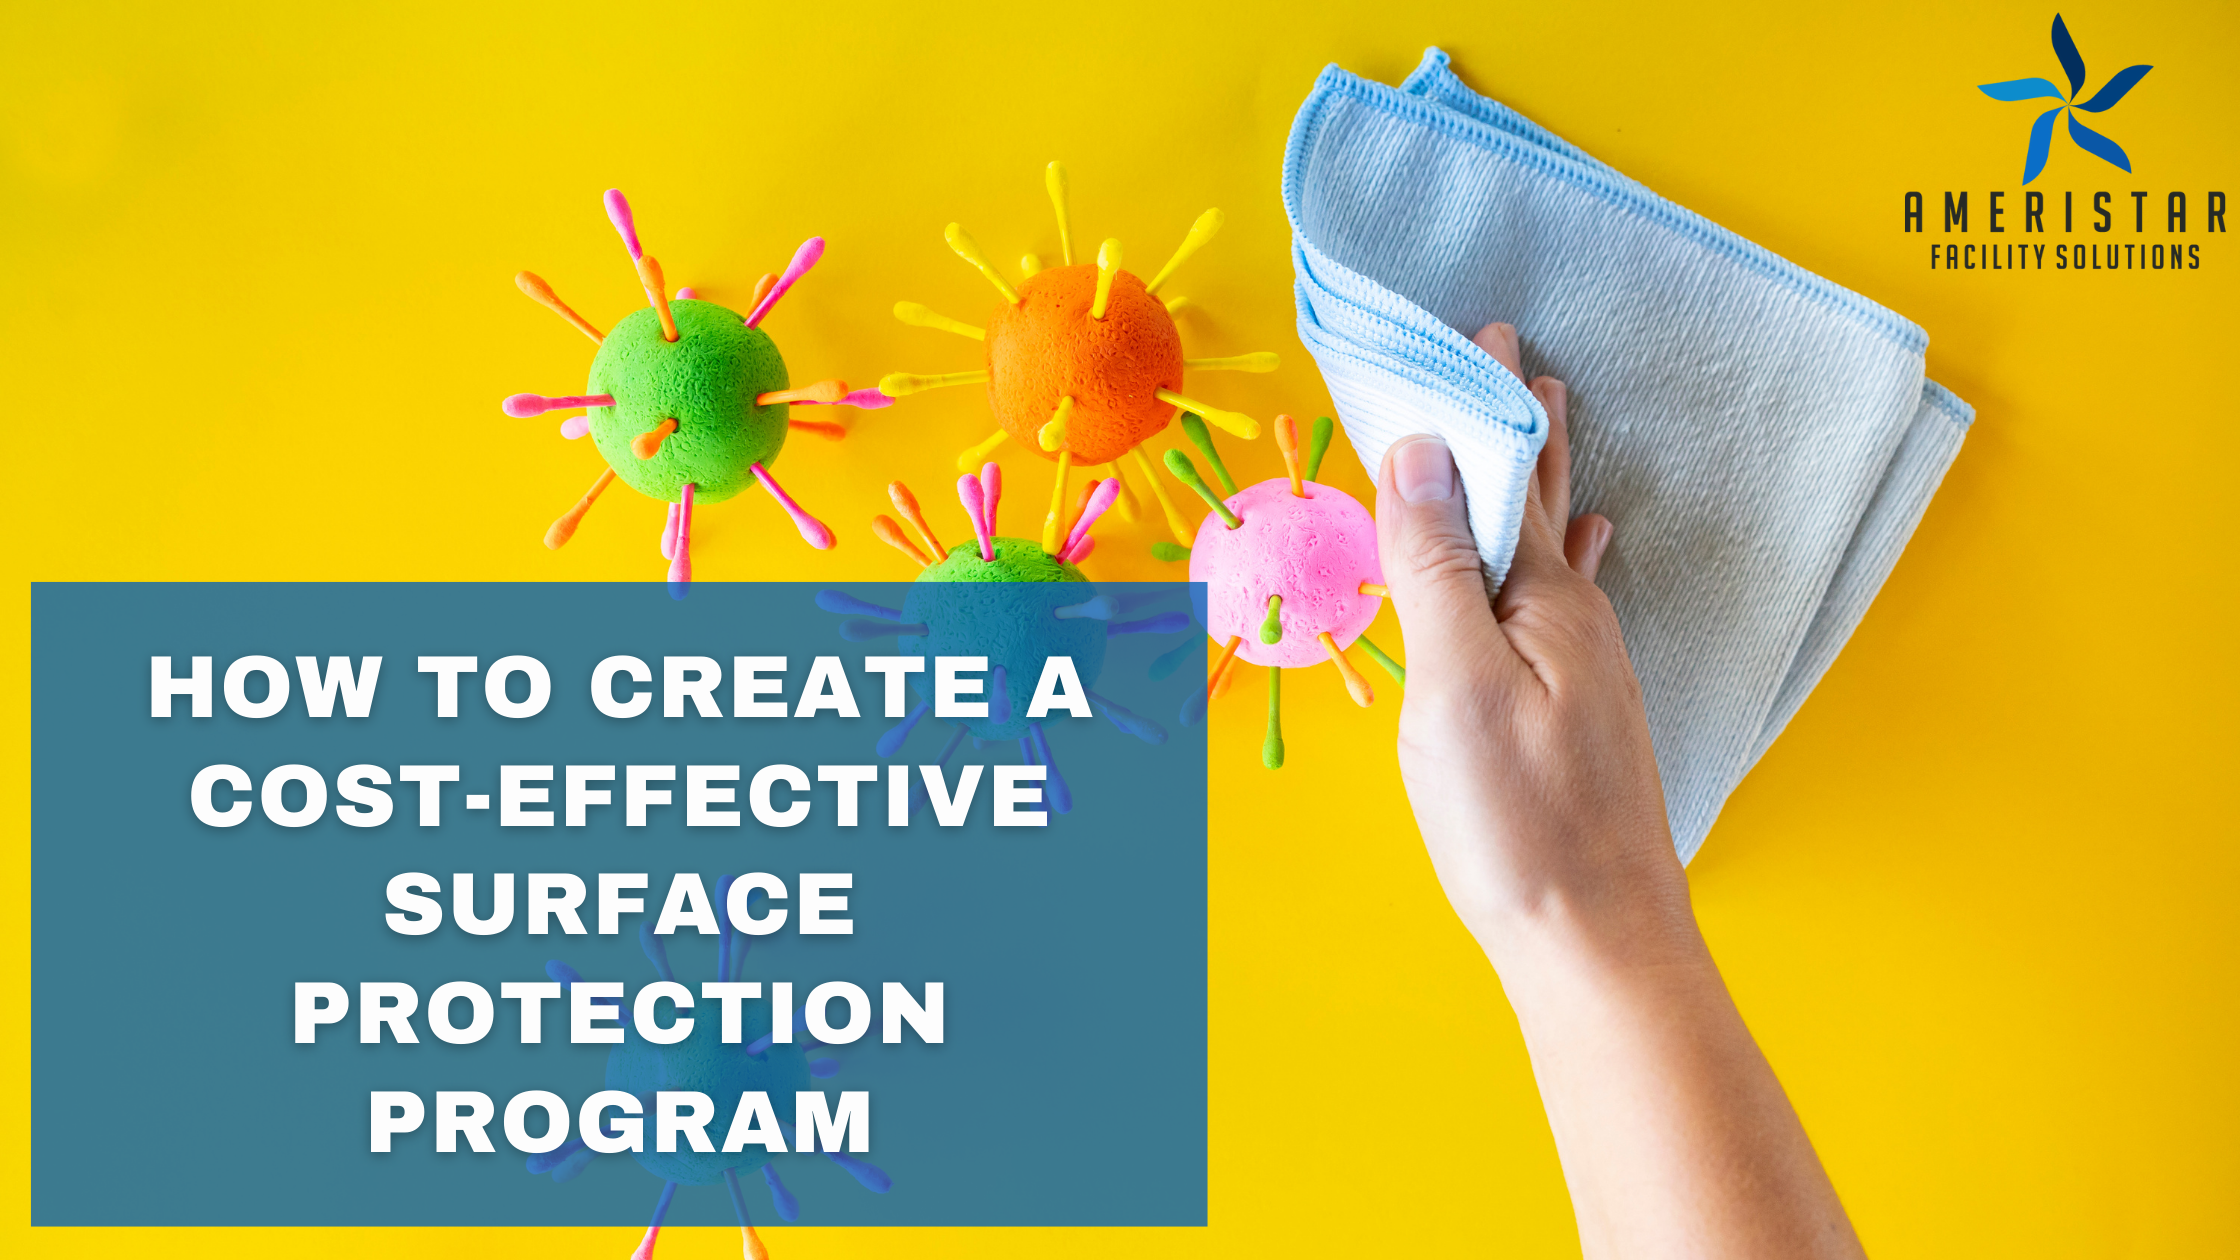 How to Create a Cost-Effective Surface Protection Program